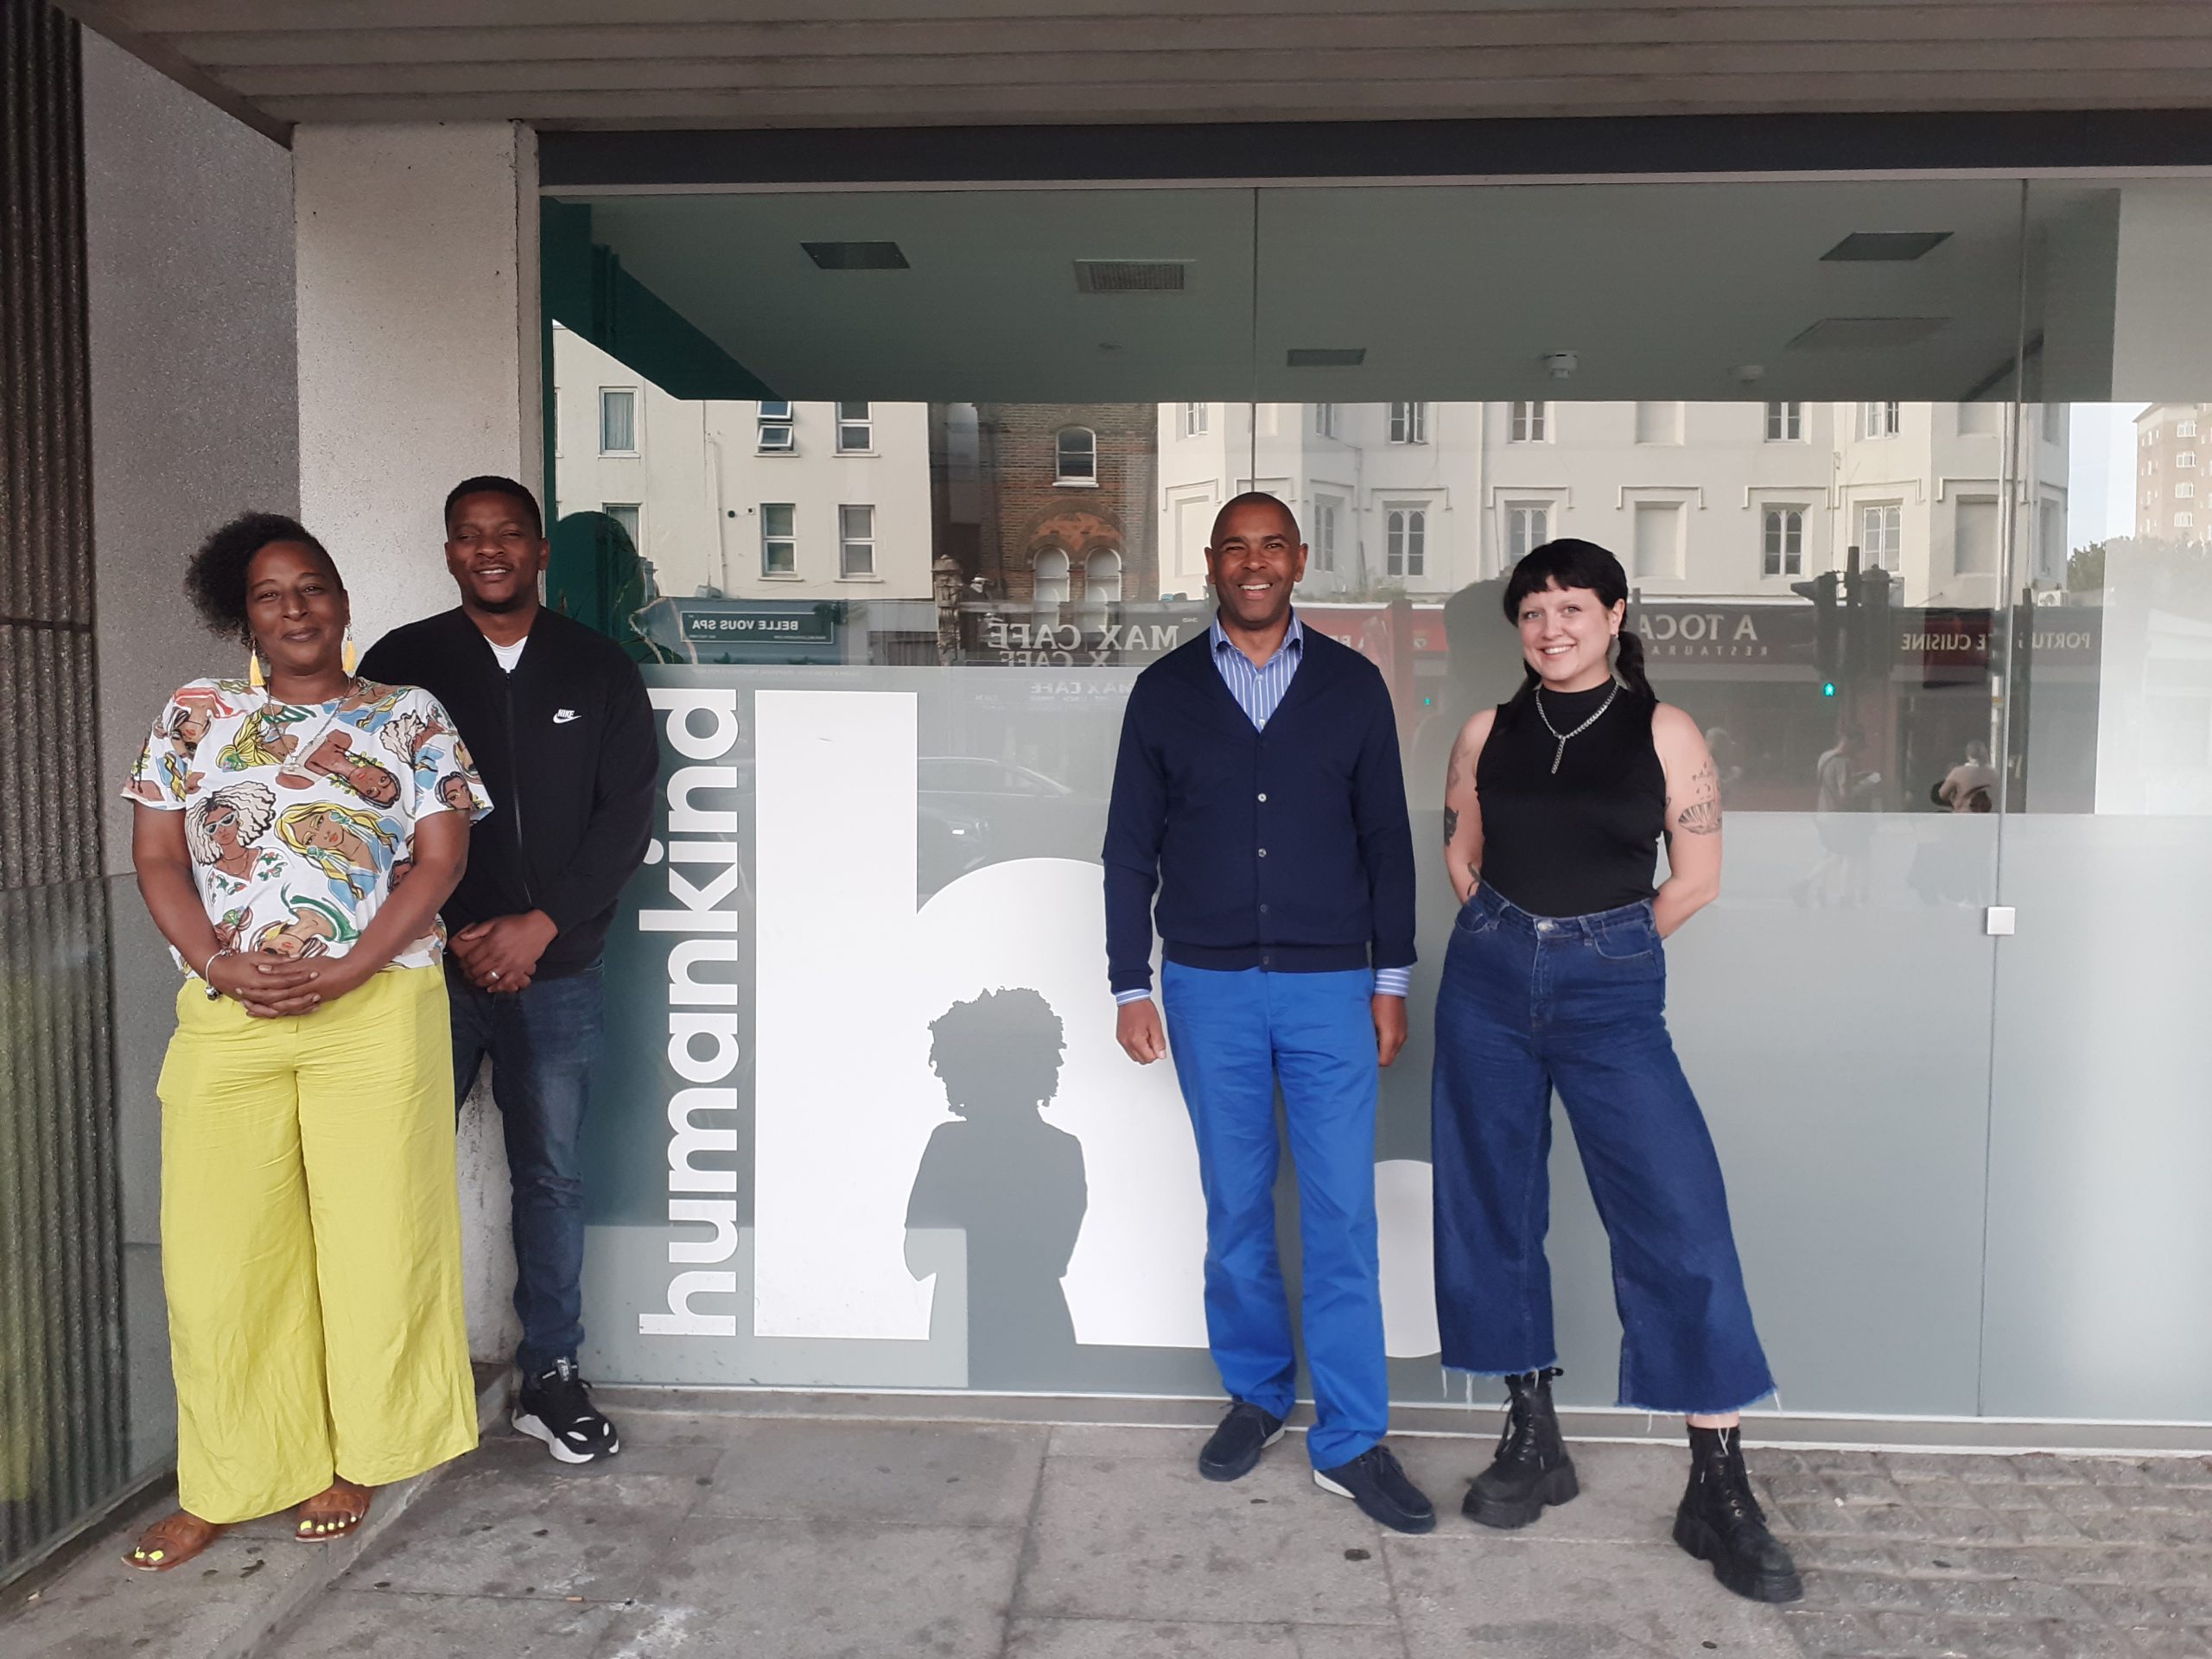 An image of Humankind's Individual Placement & Support team in front of Humankind's London regional office